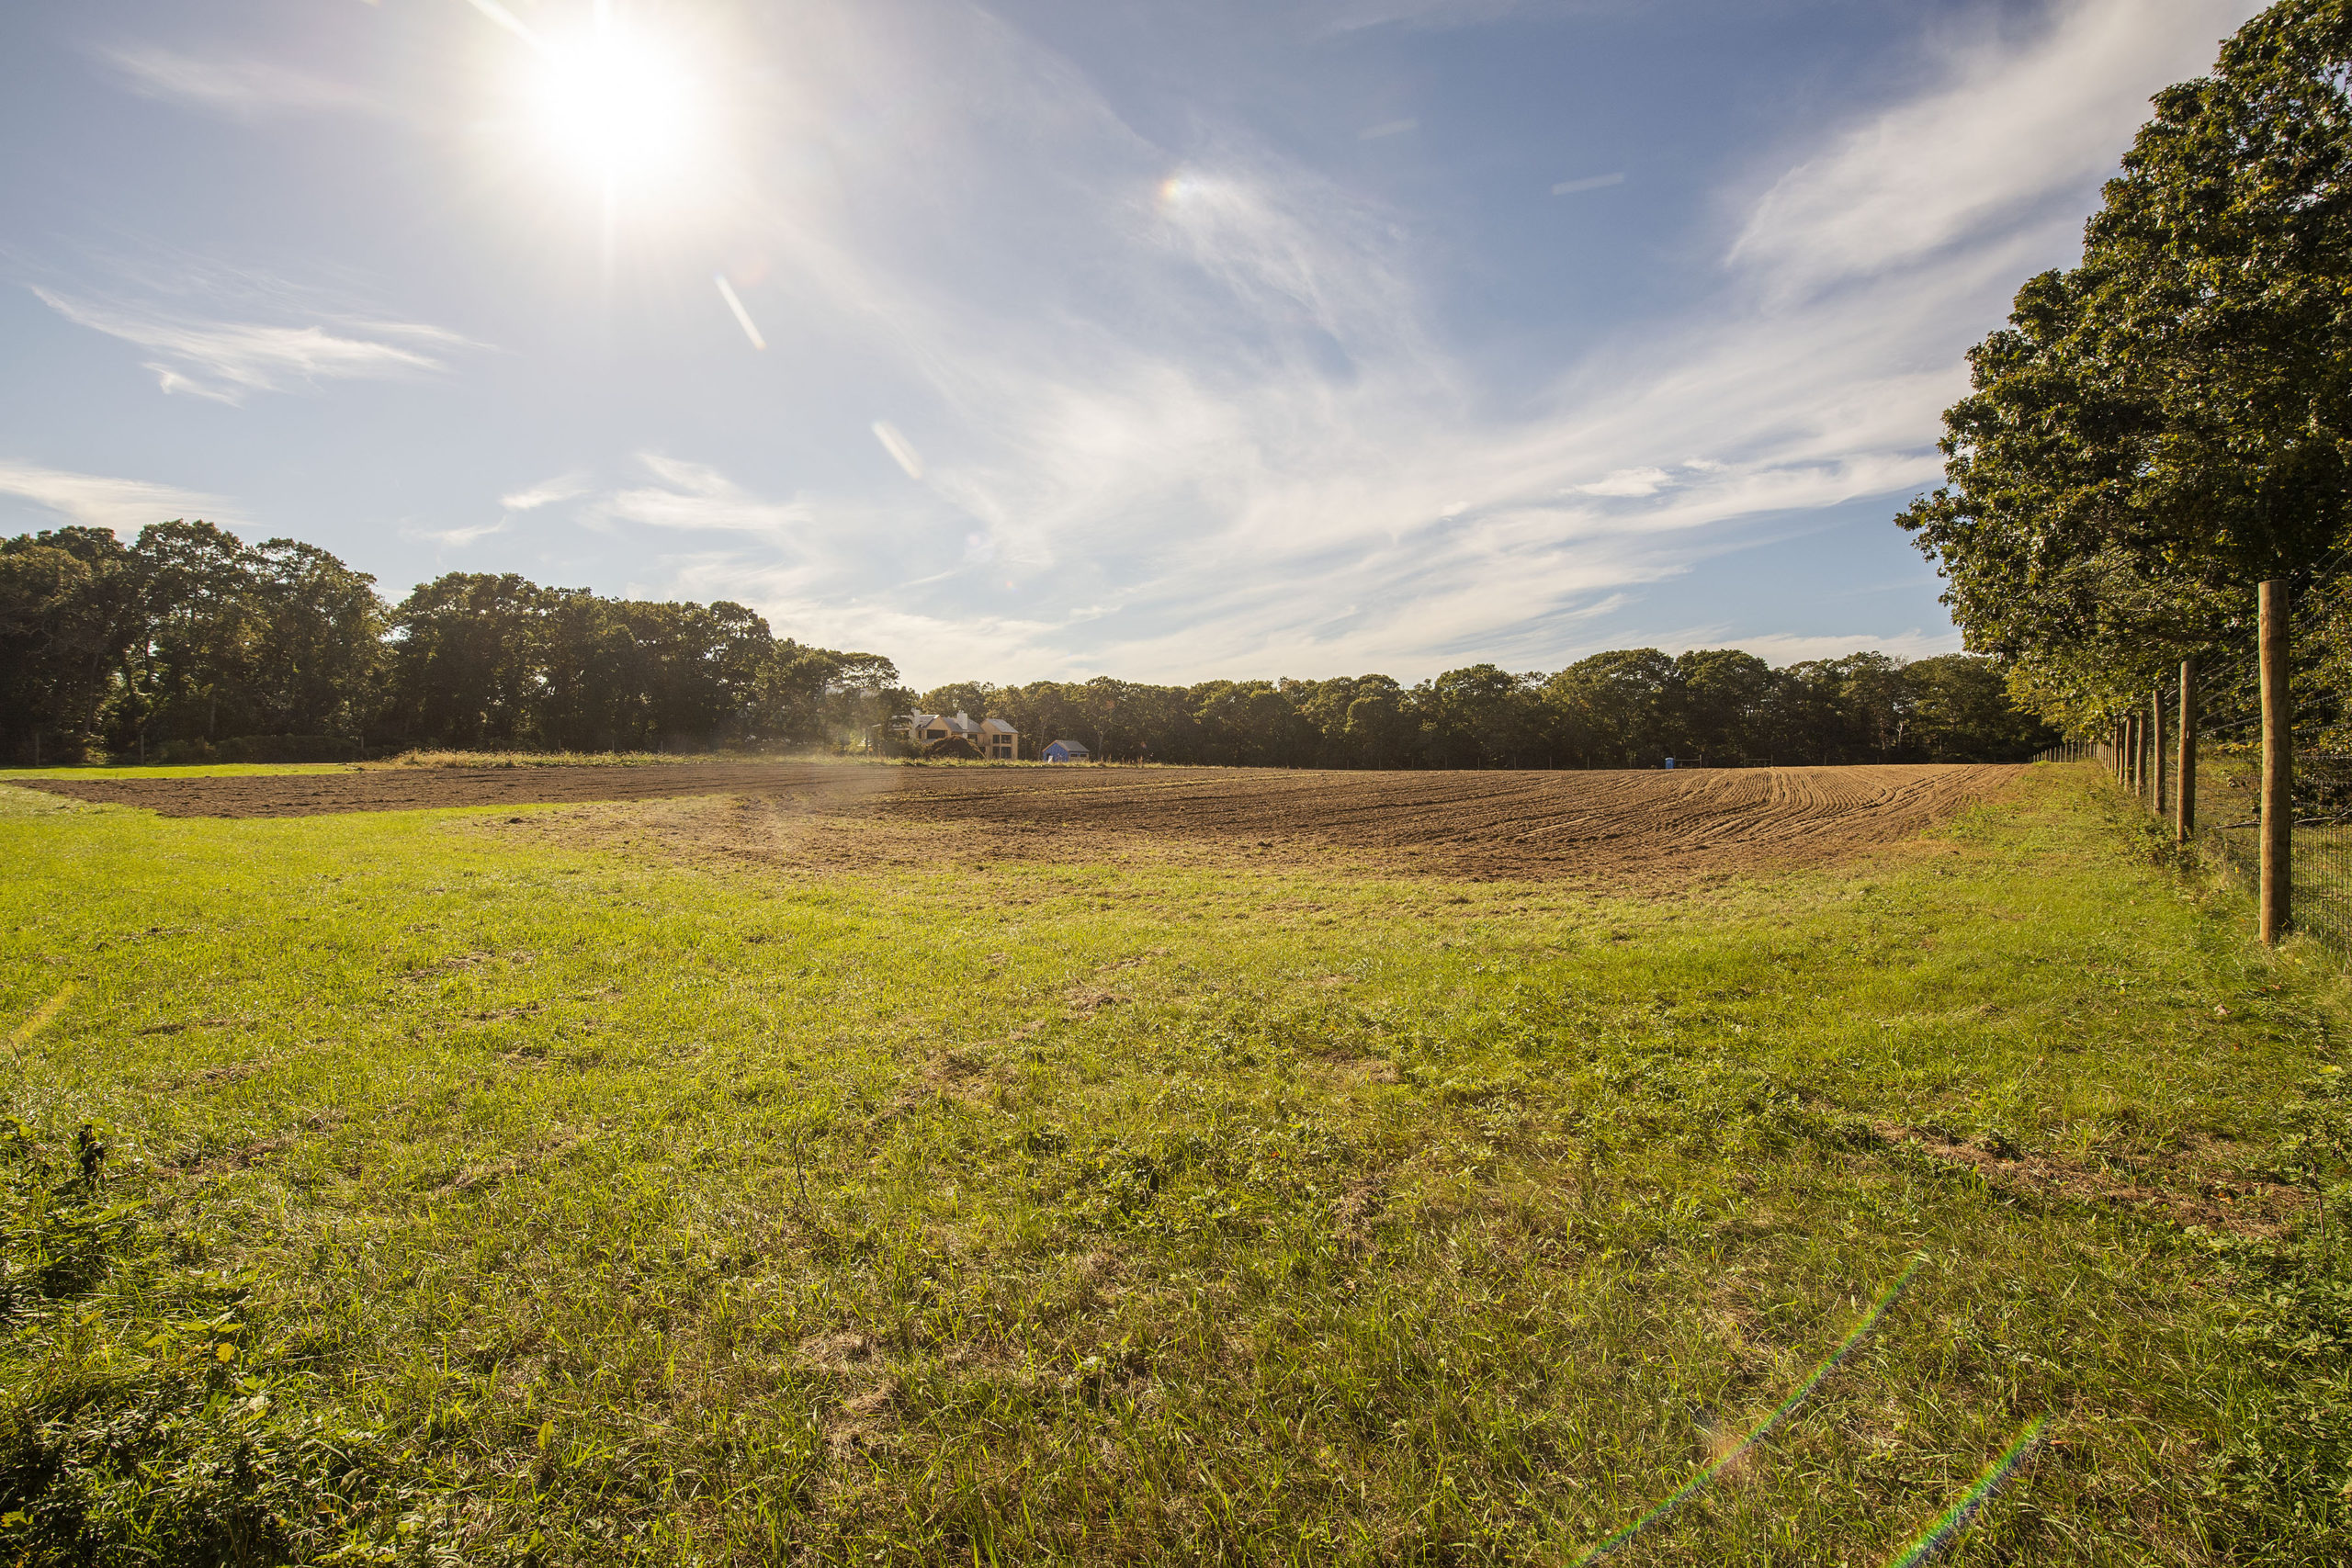 East Hampton Town has proposed purchasing three half-acre building lots at the back of this farm field at the intersection of Buckskill Road and Green Hollow Road. The cost would be more than $6.8 million, with a group of neighbors contributing $2.6 million to the purchase.